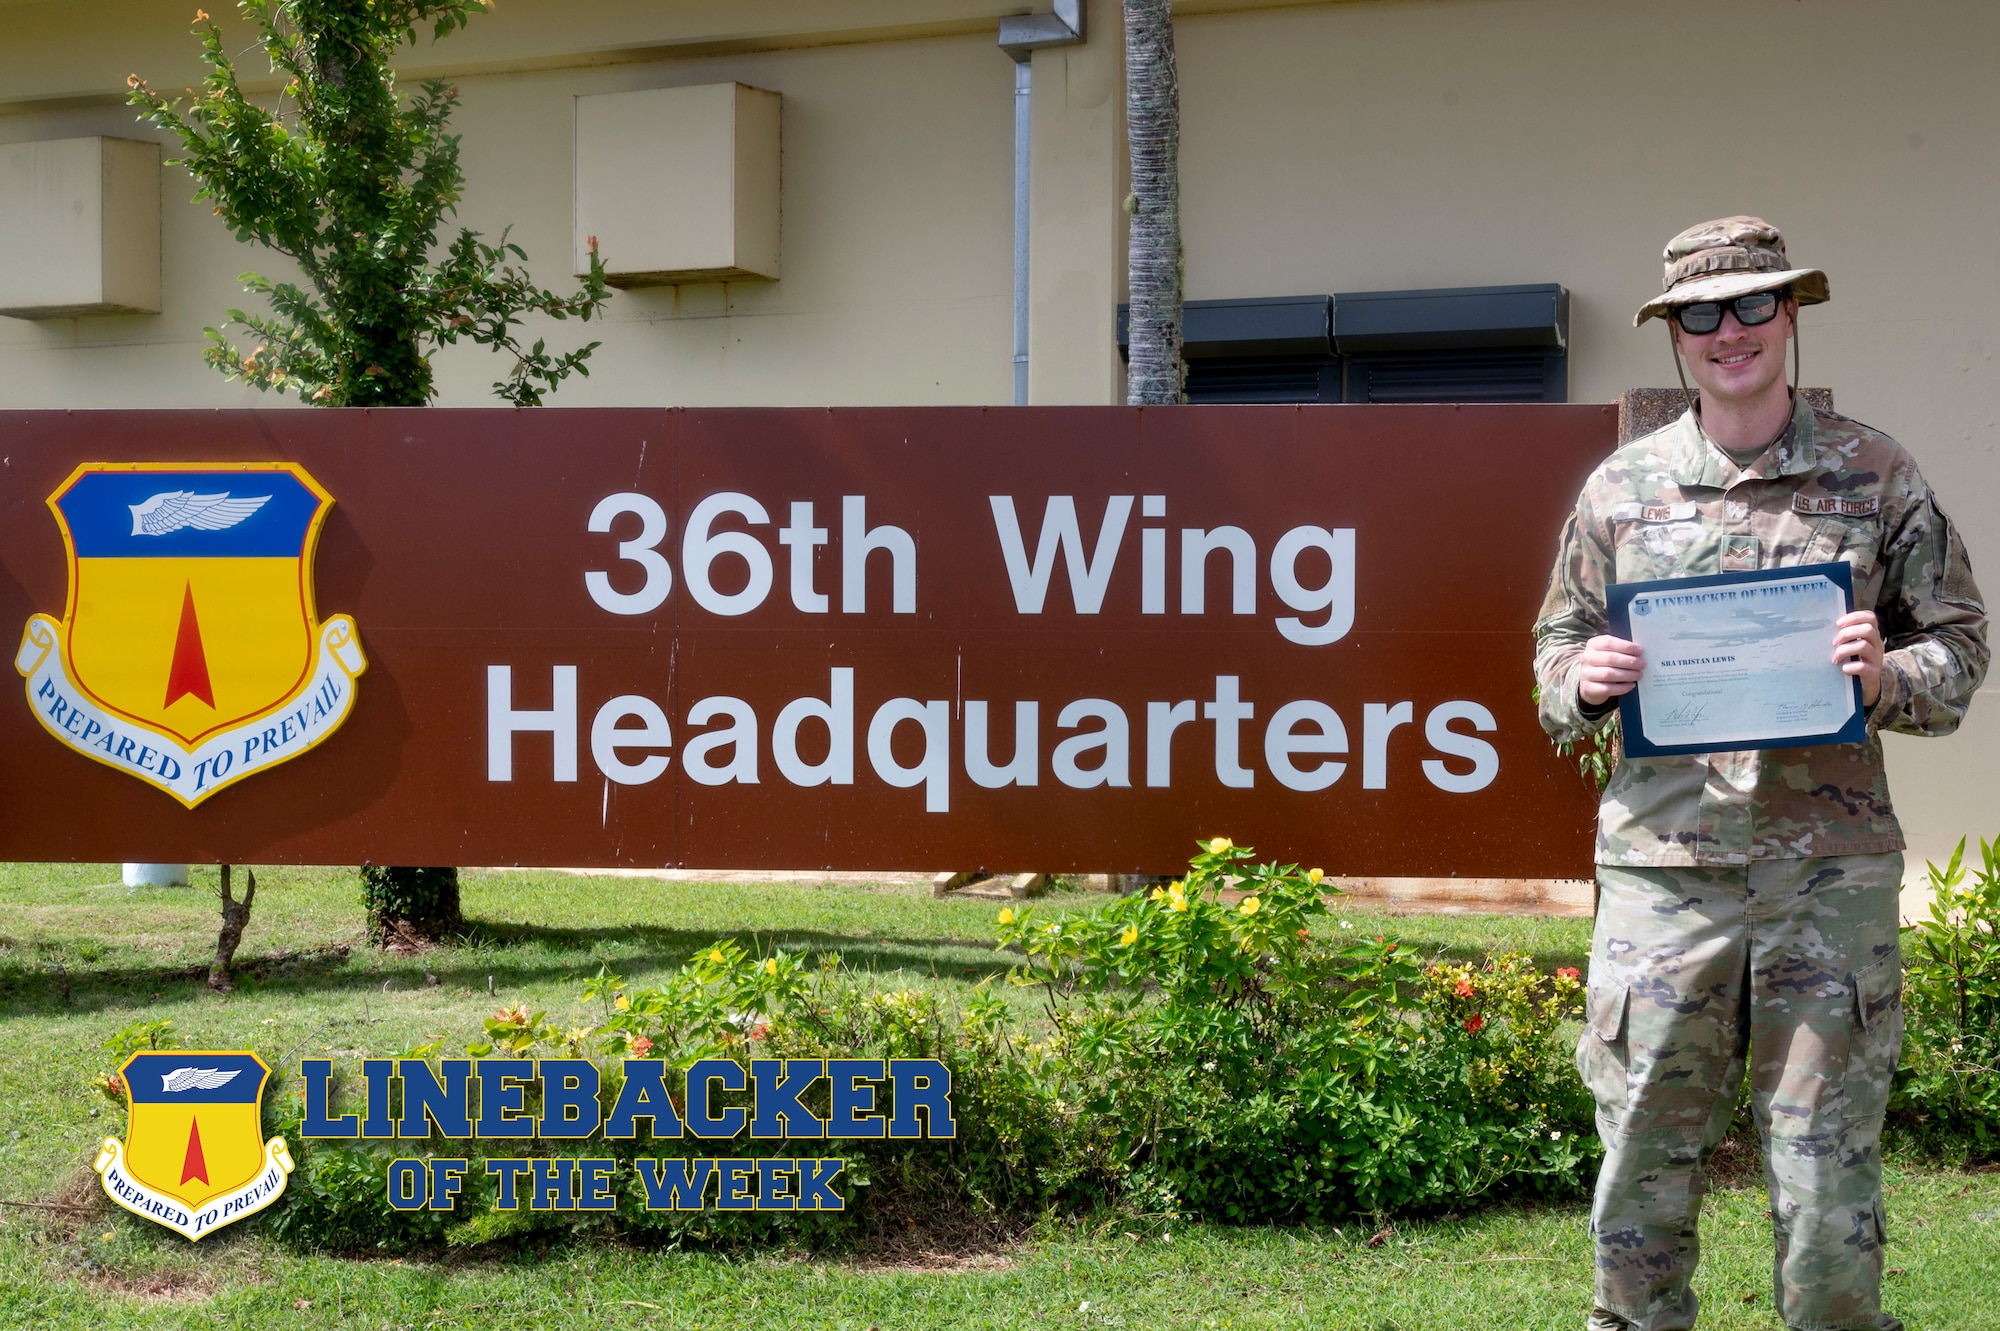 U.S. Air Force Senior Airman Tristan Lewis, a wing administrator for the 36th Wing, poses for a photo at Andersen Air Force Base, Guam, Nov. 29, 2023. The Team Andersen Linebacker of the Week recognizes outstanding enlisted, officer, civilian and total force personnel who have had an impact on achieving Team Andersen’s mission, vision and priorities. (U.S. Air Force photo illustration by Senior Airman Emily Saxton)